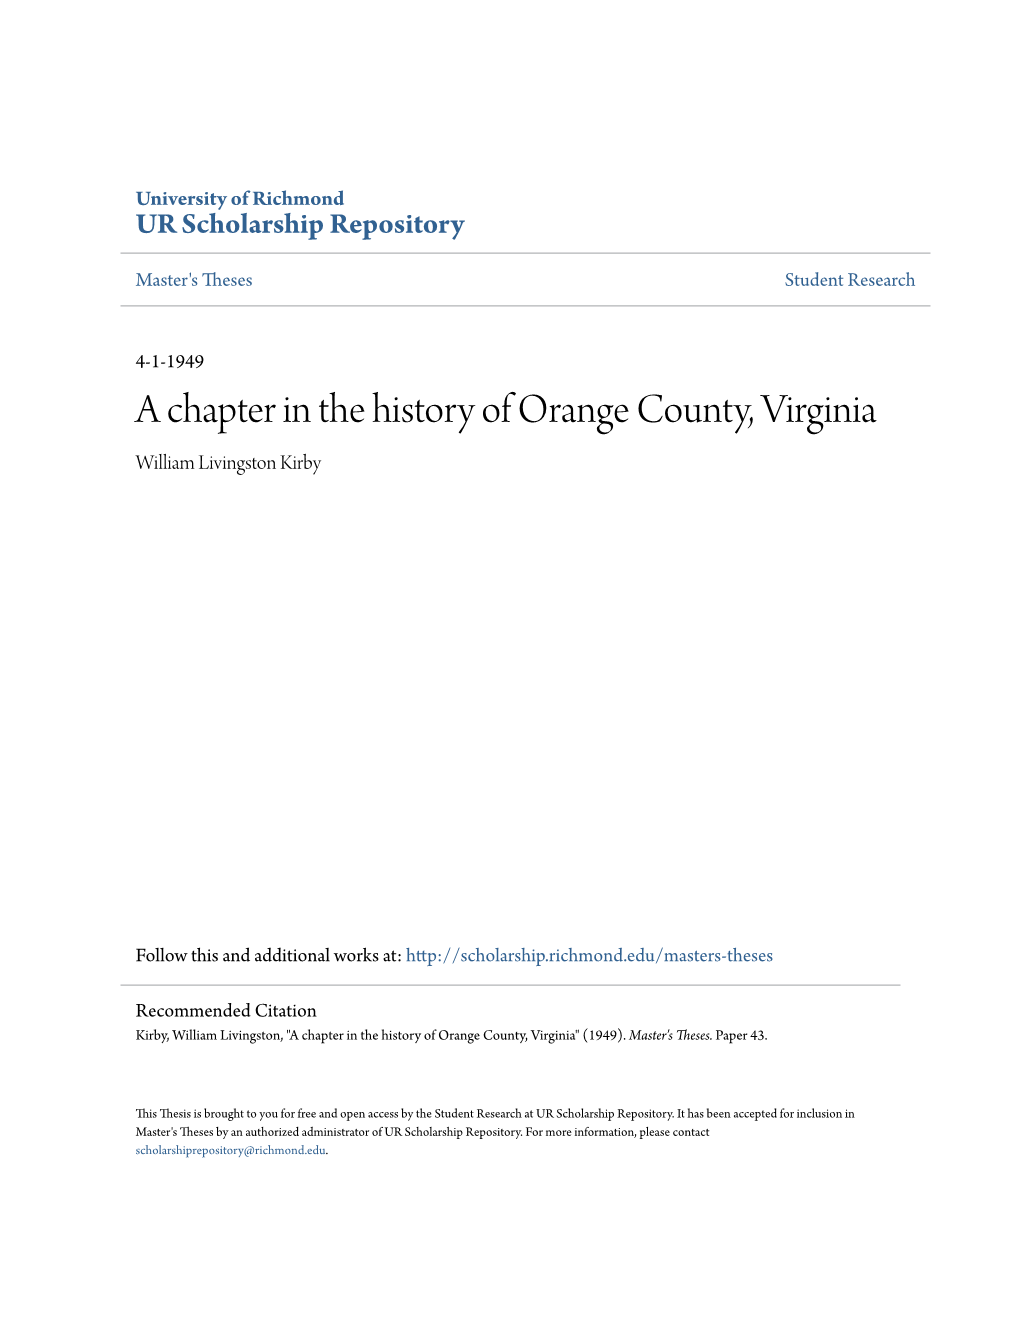 A Chapter in the History of Orange County, Virginia William Livingston Kirby